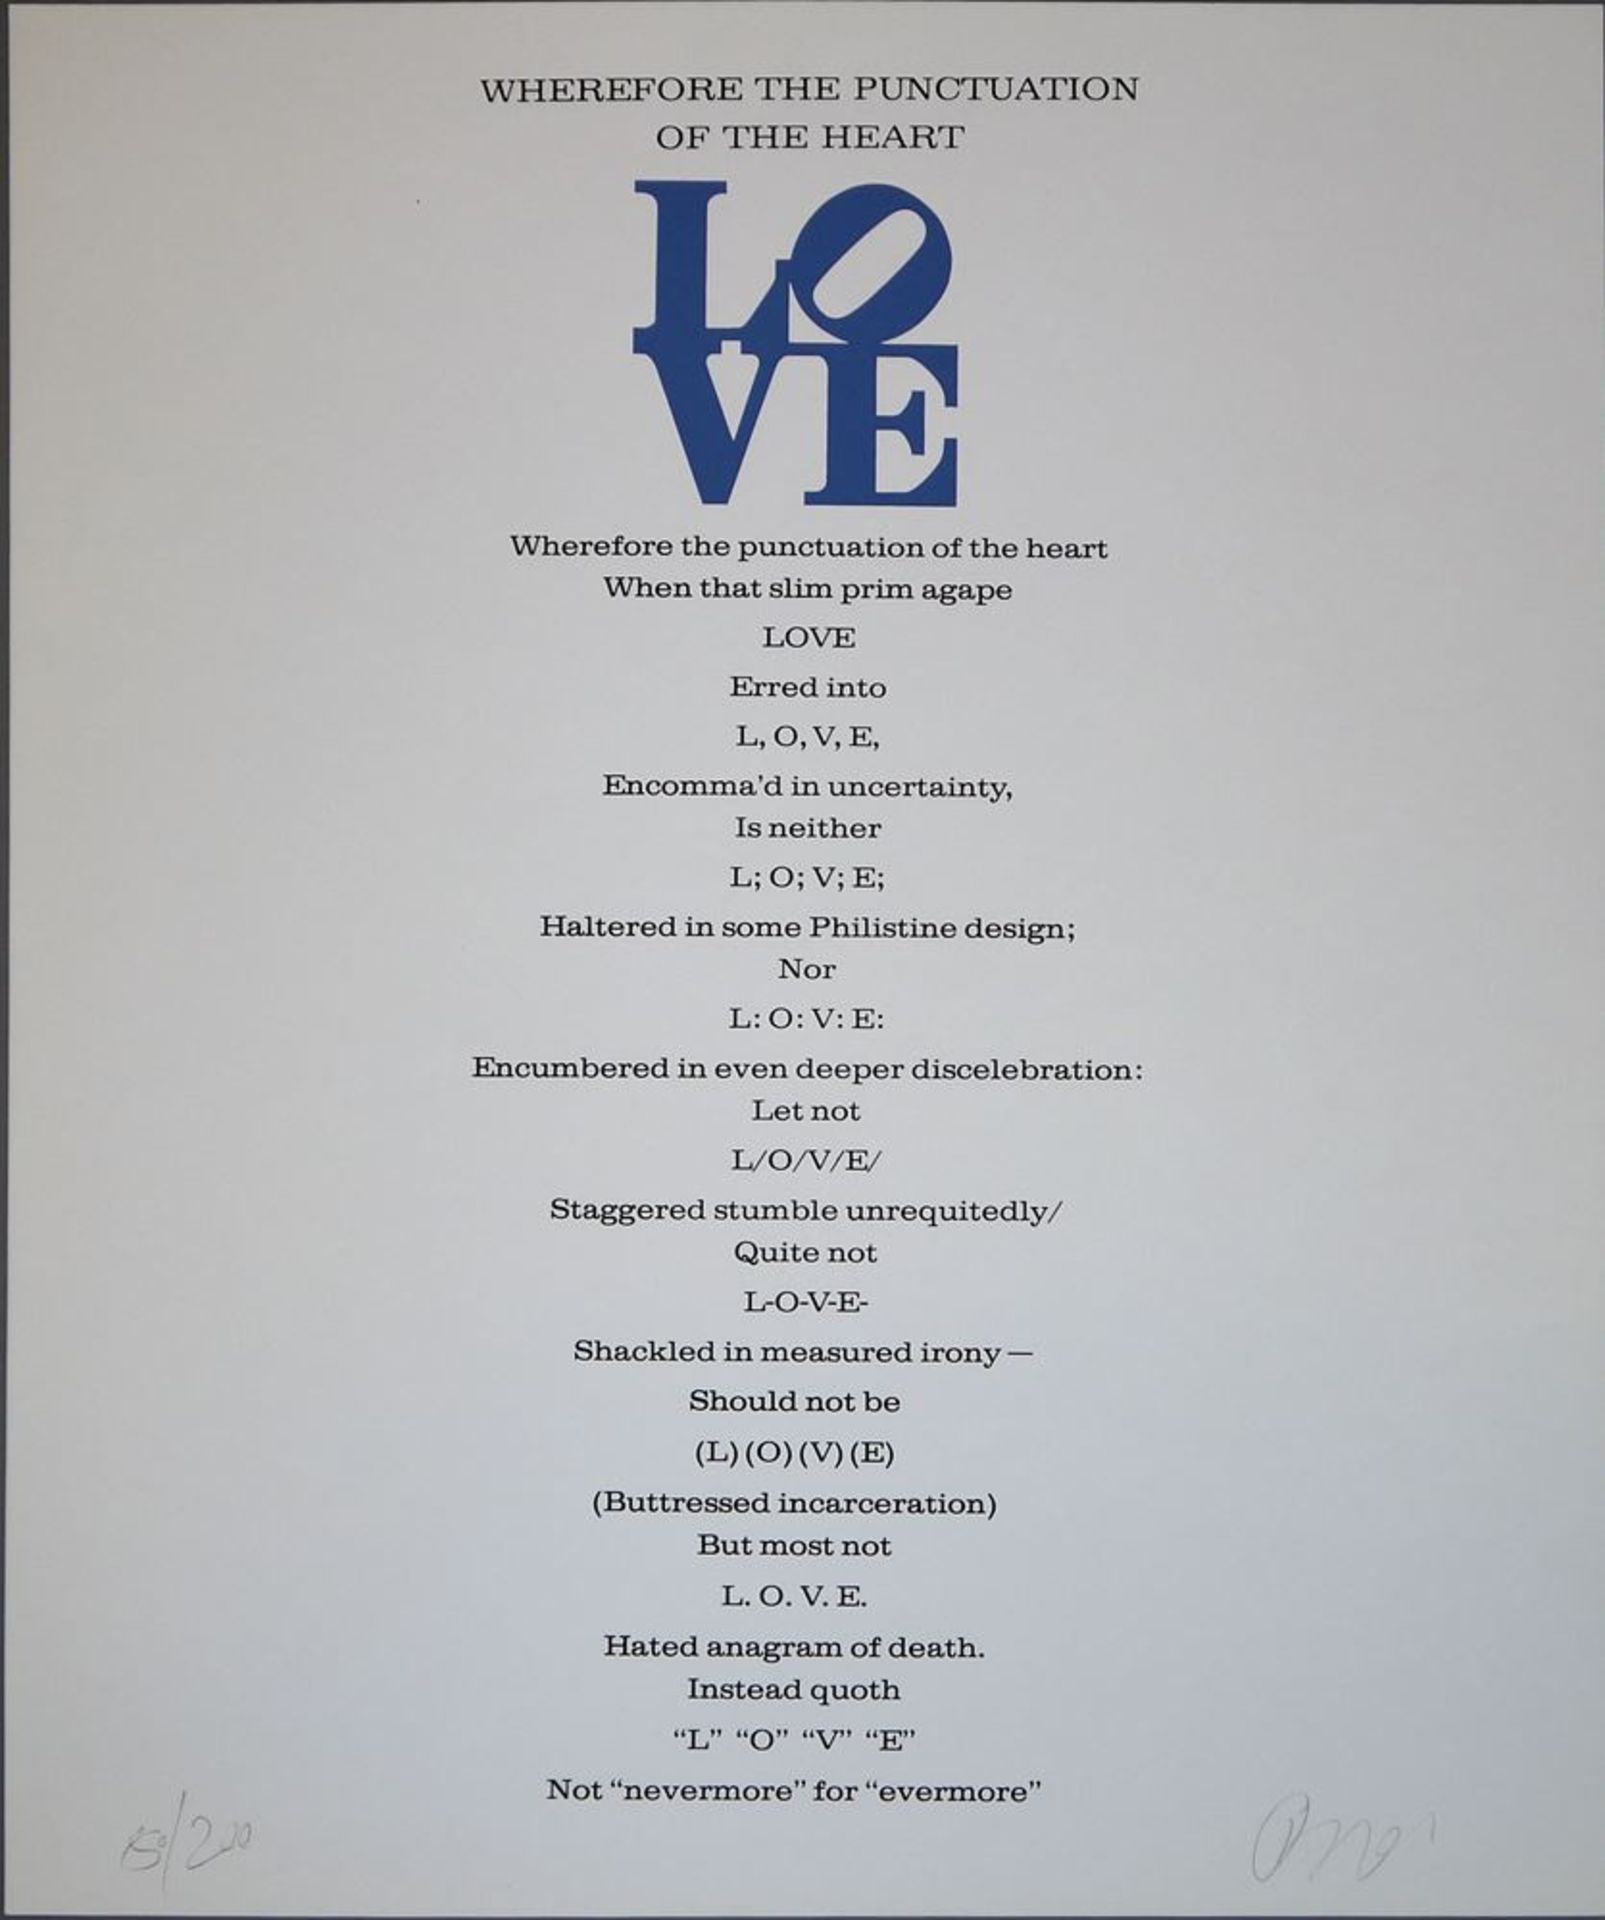 Robert Indiana, "The book of LOVE - Wherefore the punctuation of the heart", Serigraphie von 1996,